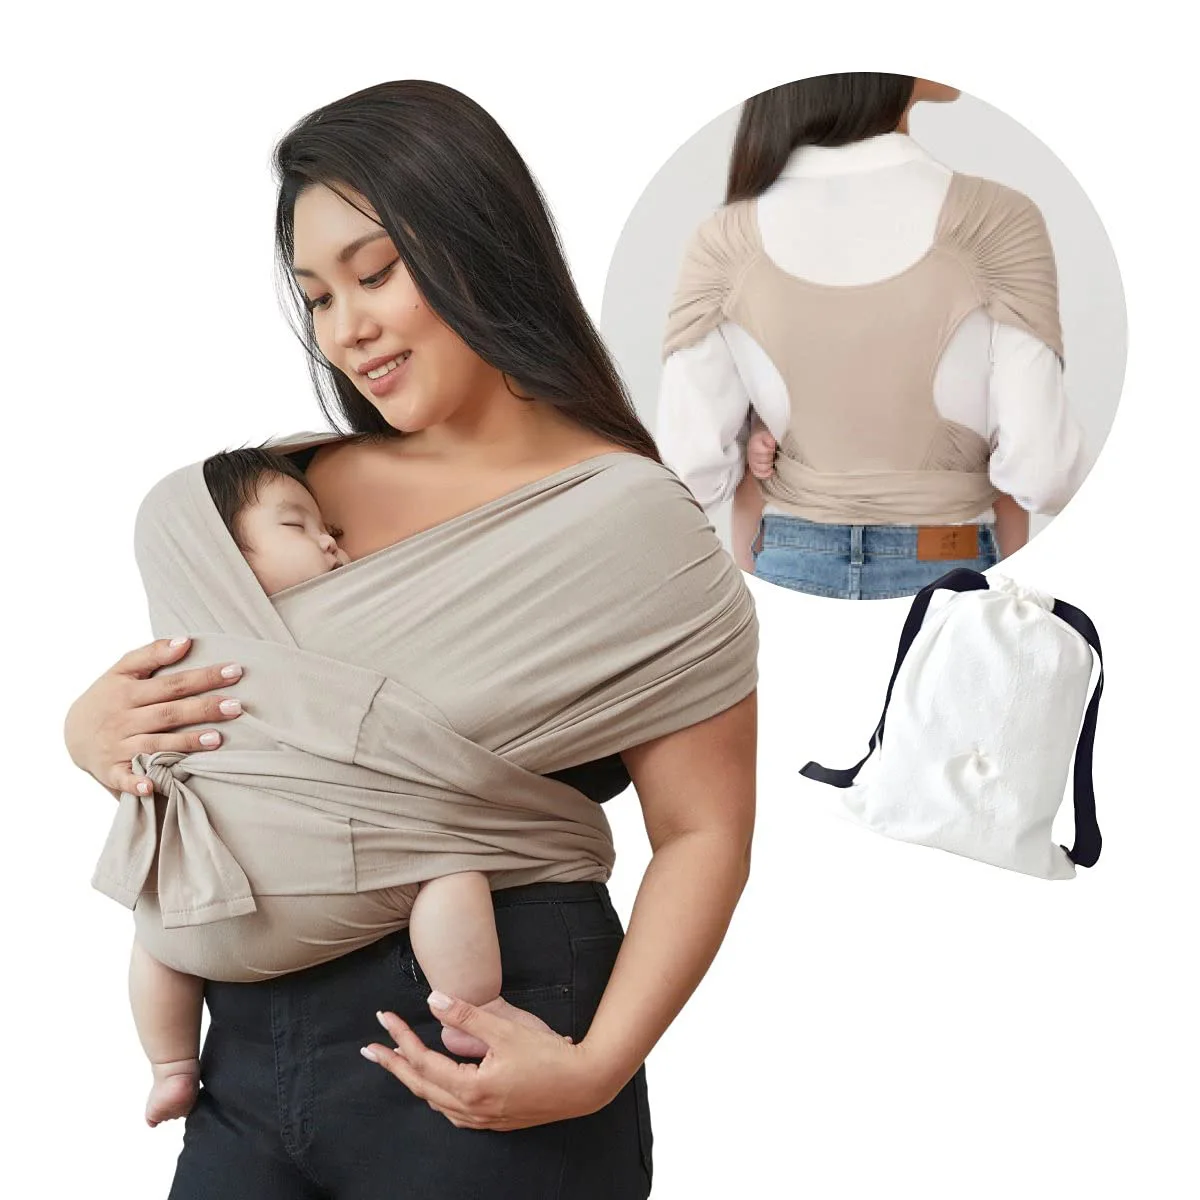 

Baby Wrap Sling Summer Breathable Cotton Cross Sling Infant Light Front Holding Childcare Sling Carrier for Baby accesorios bebe